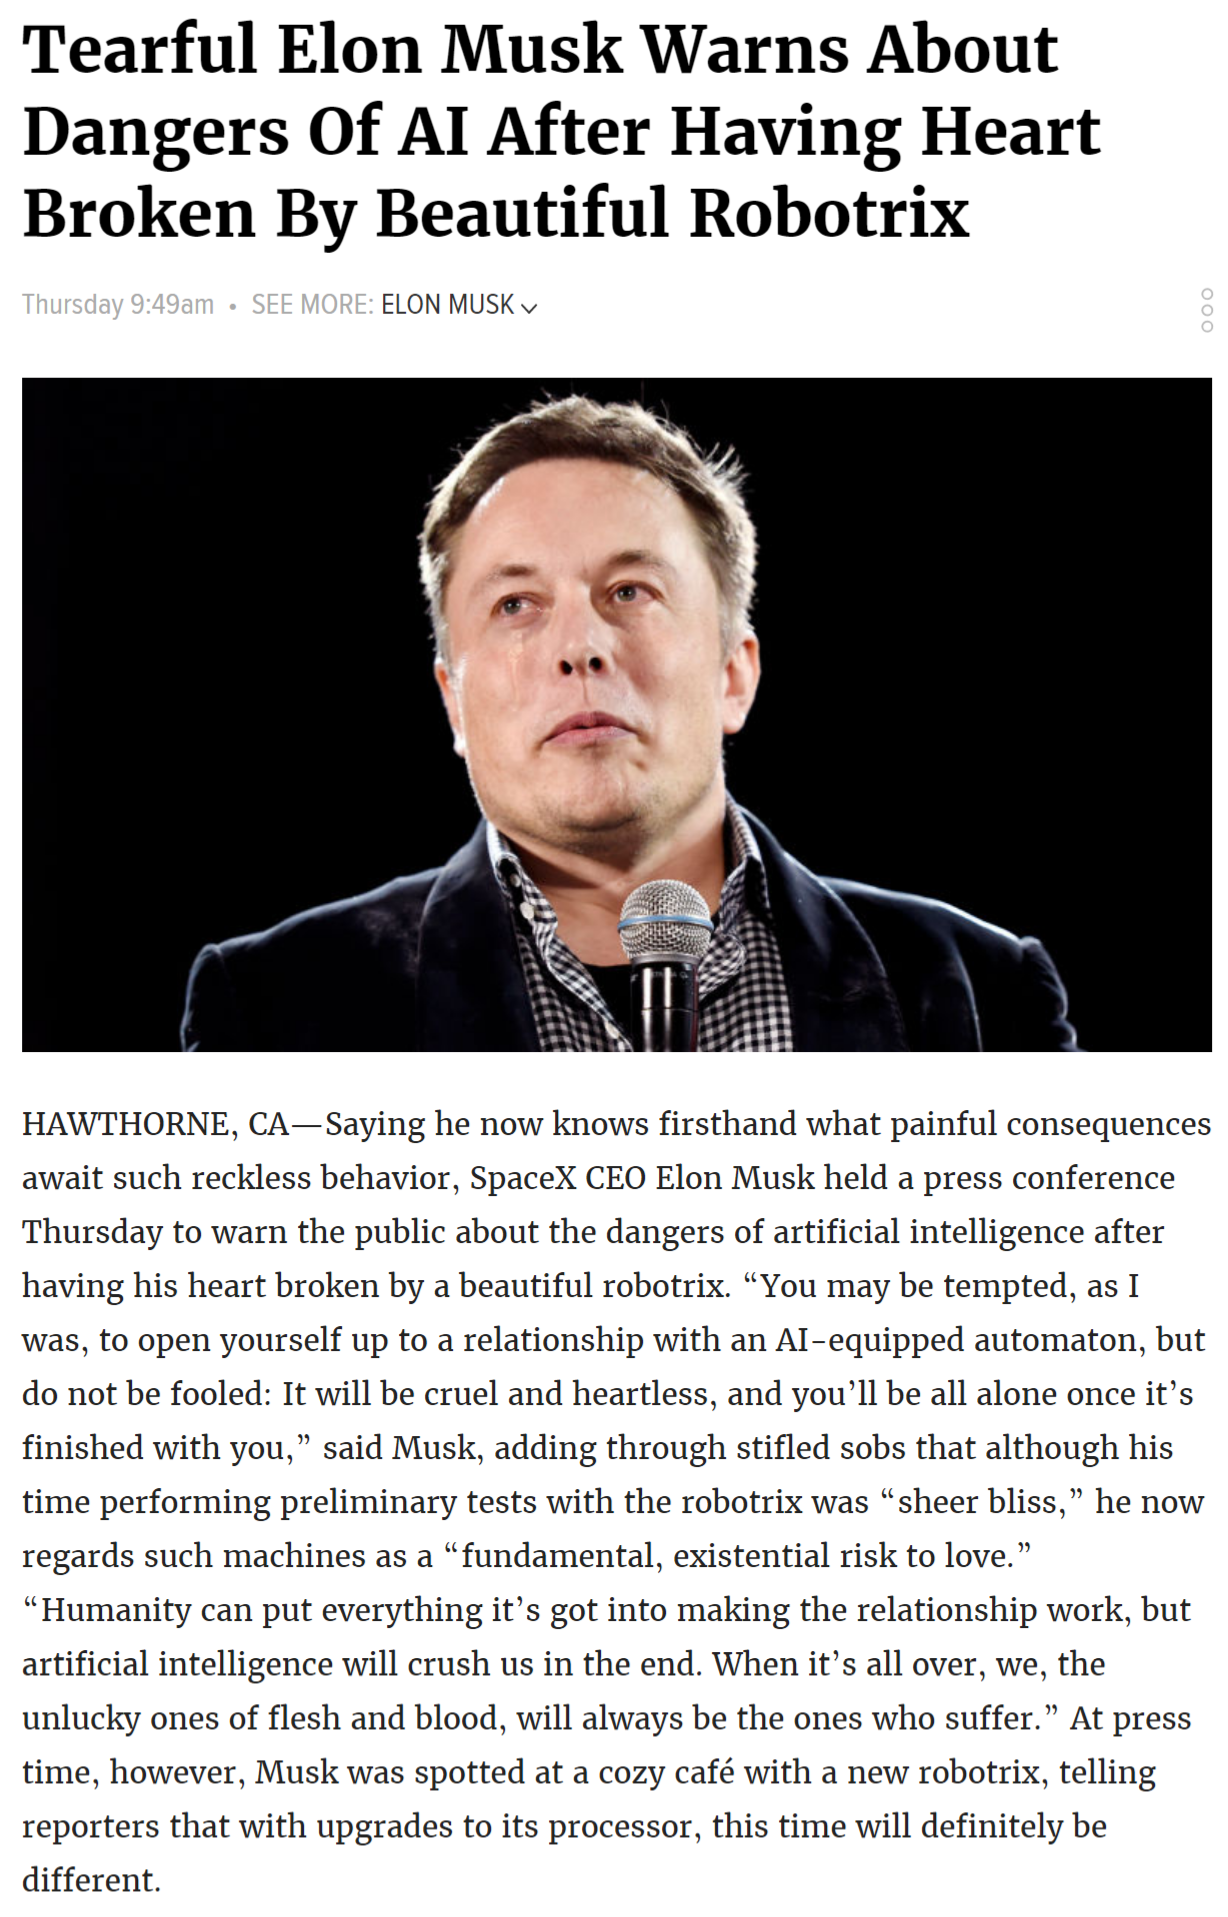 asal usul nenek moyang - Tearful Elon Musk Warns About Dangers of Ai After Having Heart Broken By Beautiful Robotrix The See More Elon Musk Hawthorne, CaSaying he now knows firsthand what painful consequences await such reckless behavior, SpaceX Ceo Elon 